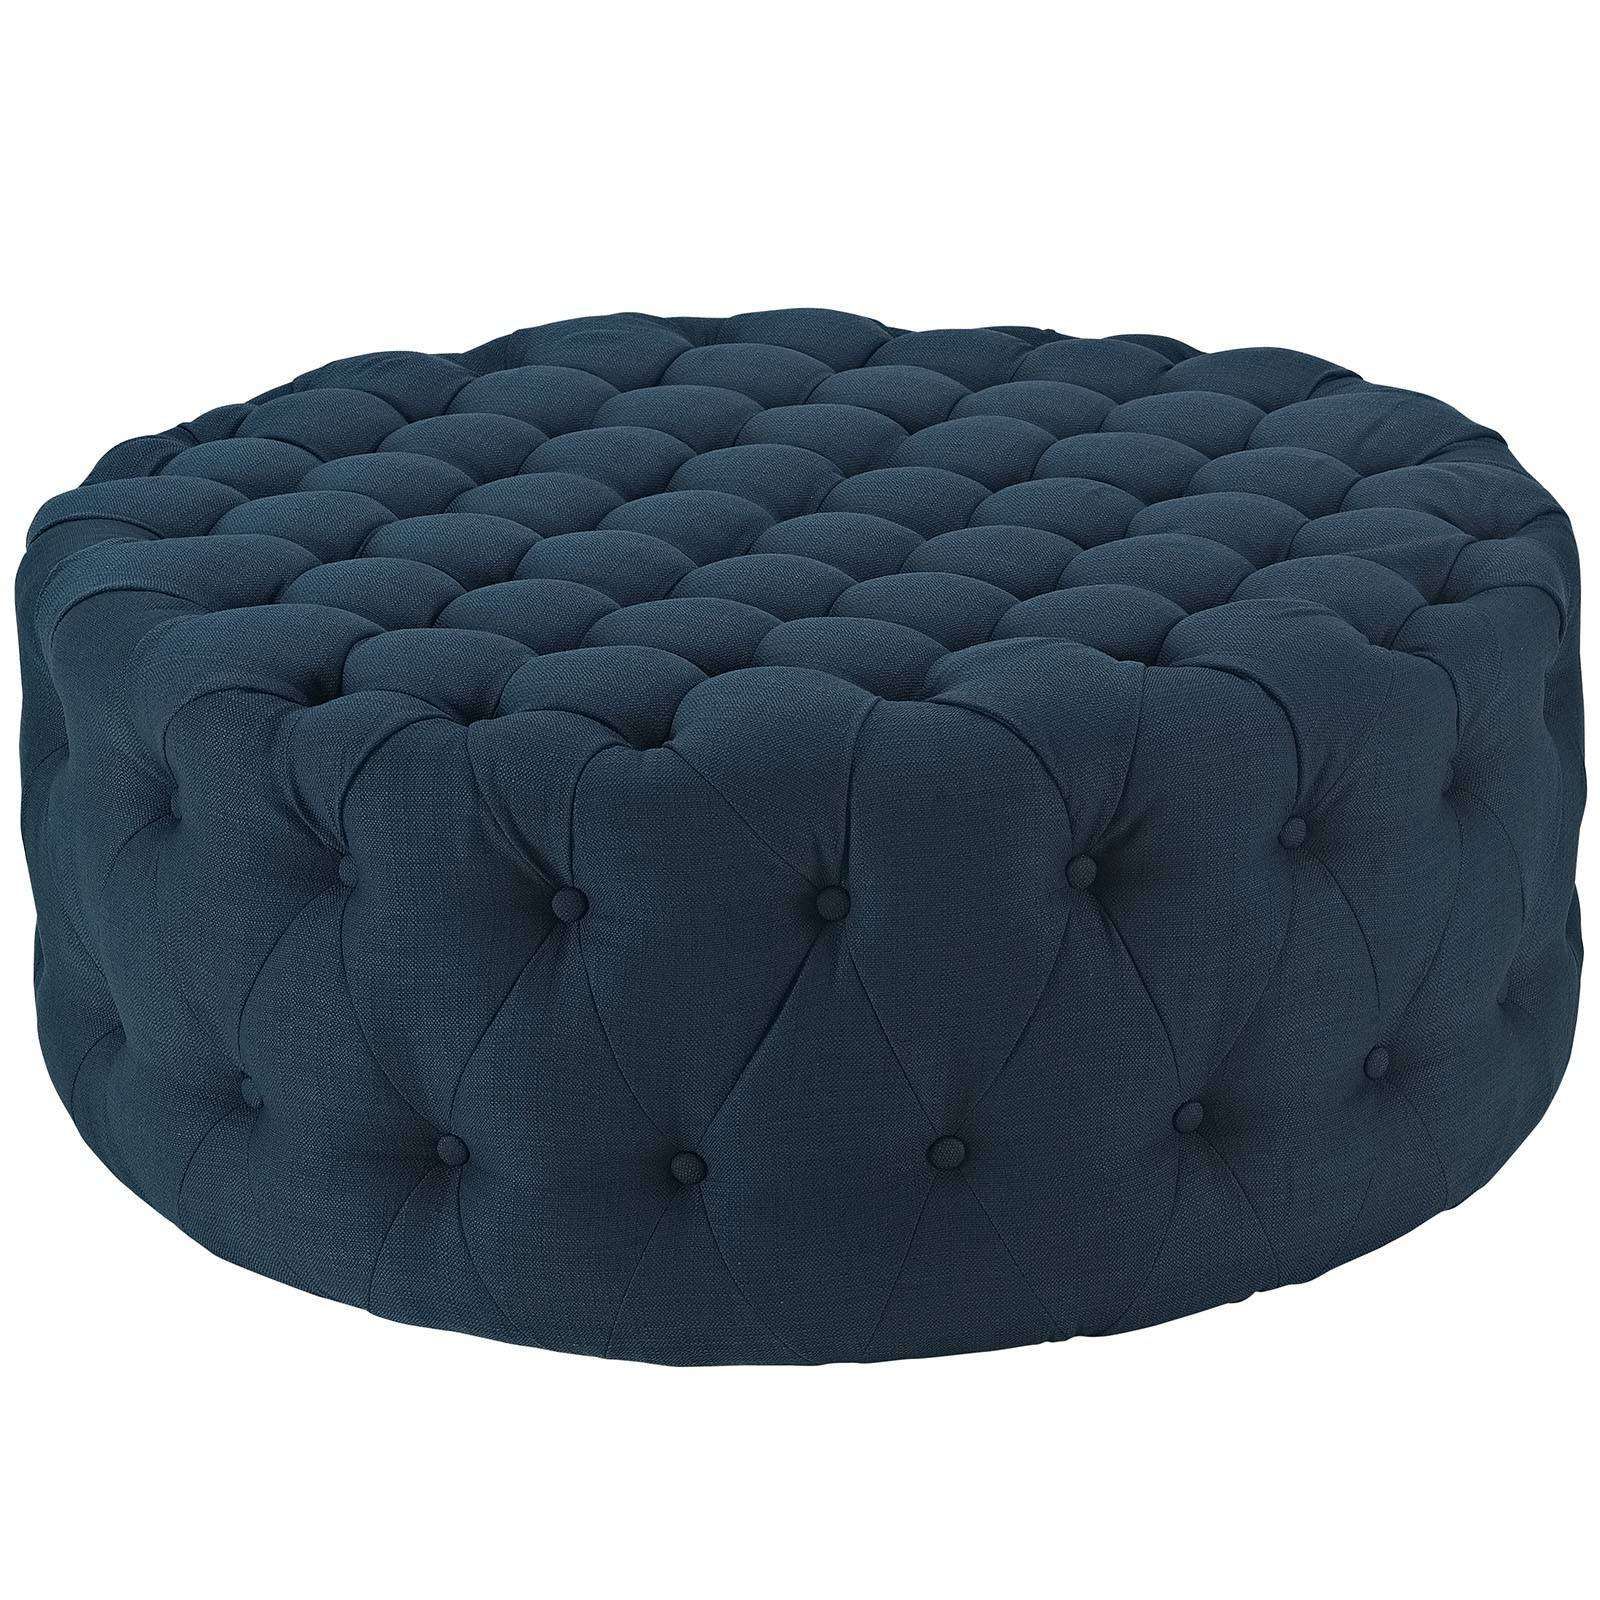 Most Current Fabric Oversized Pouf Ottomans Within Modterior :: Living Room :: Ottomans :: Amour Fabric Ottoman (View 3 of 10)